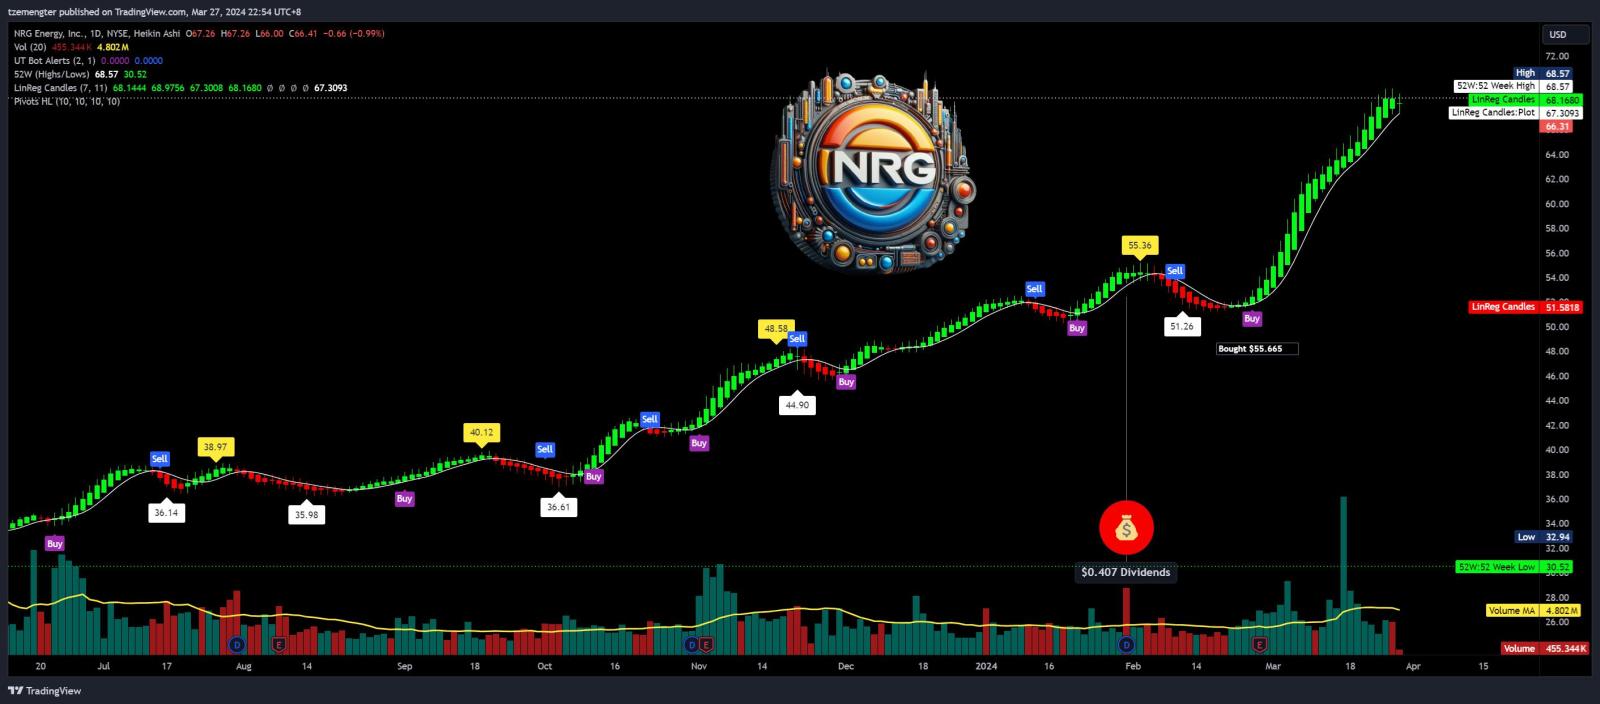 $NRG Energy (NRG.US)$ waiting for the dip, strong up trend.